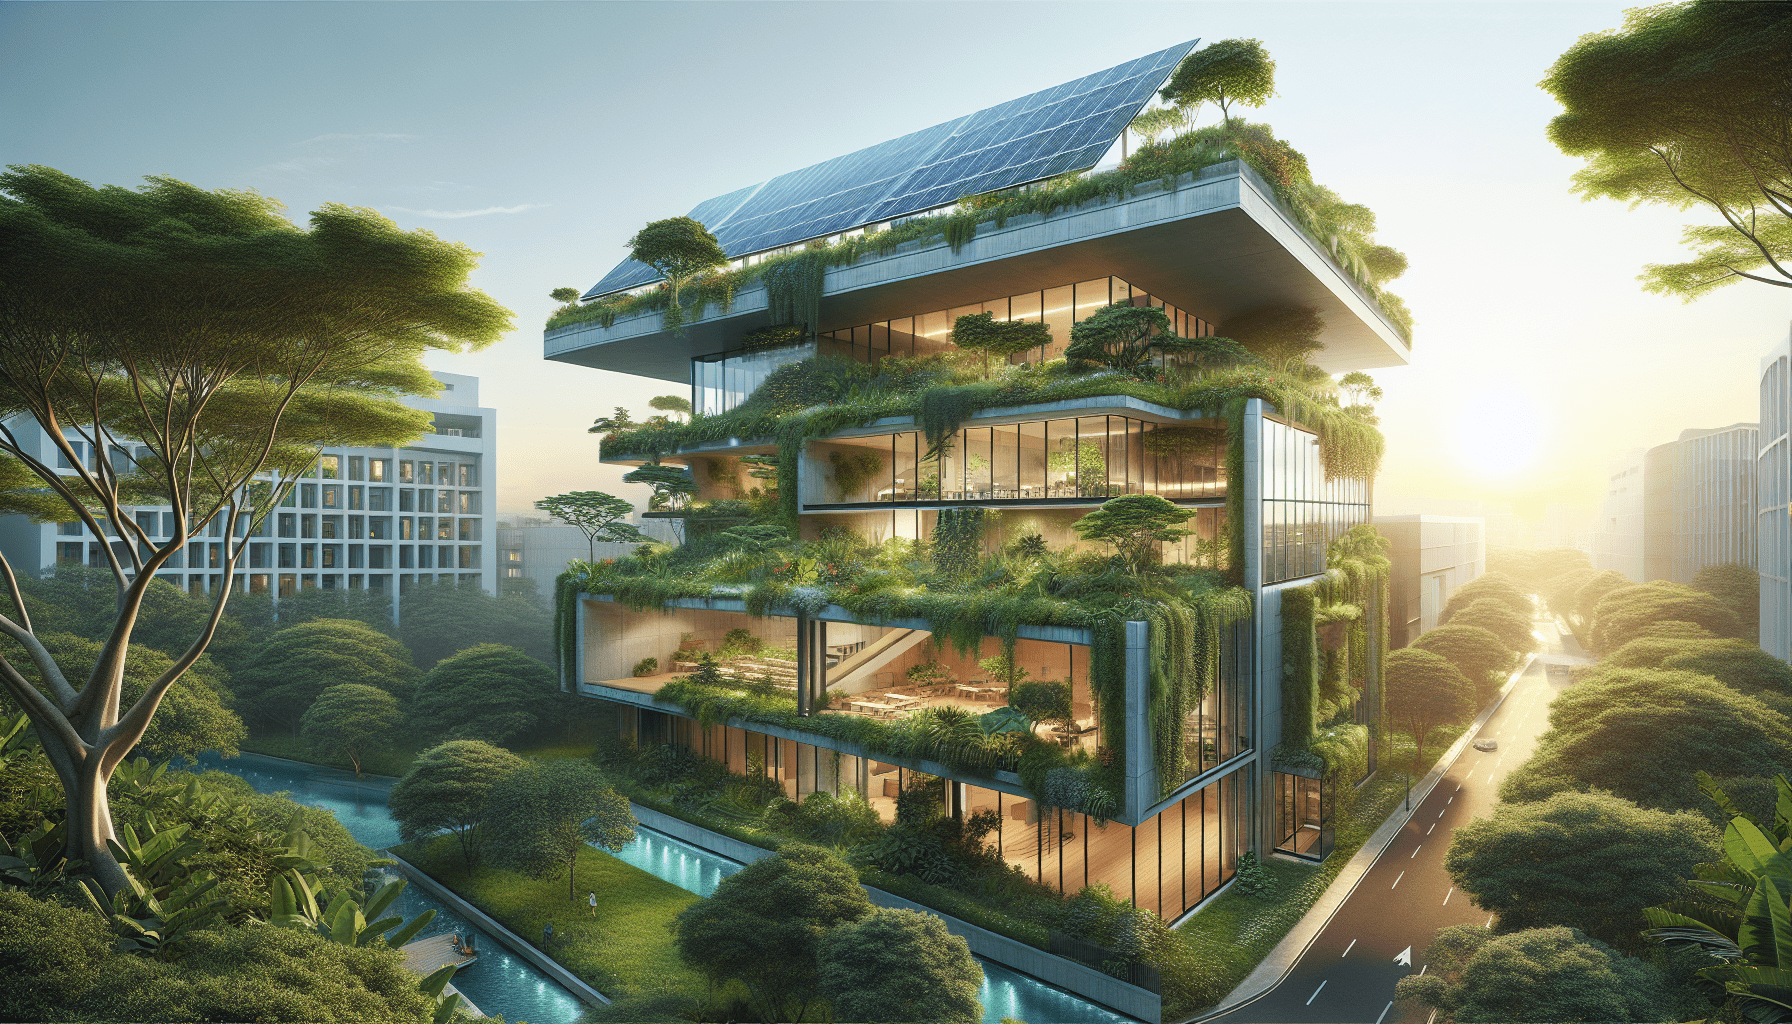 What Are The Benefits Of Sustainable Architecture?